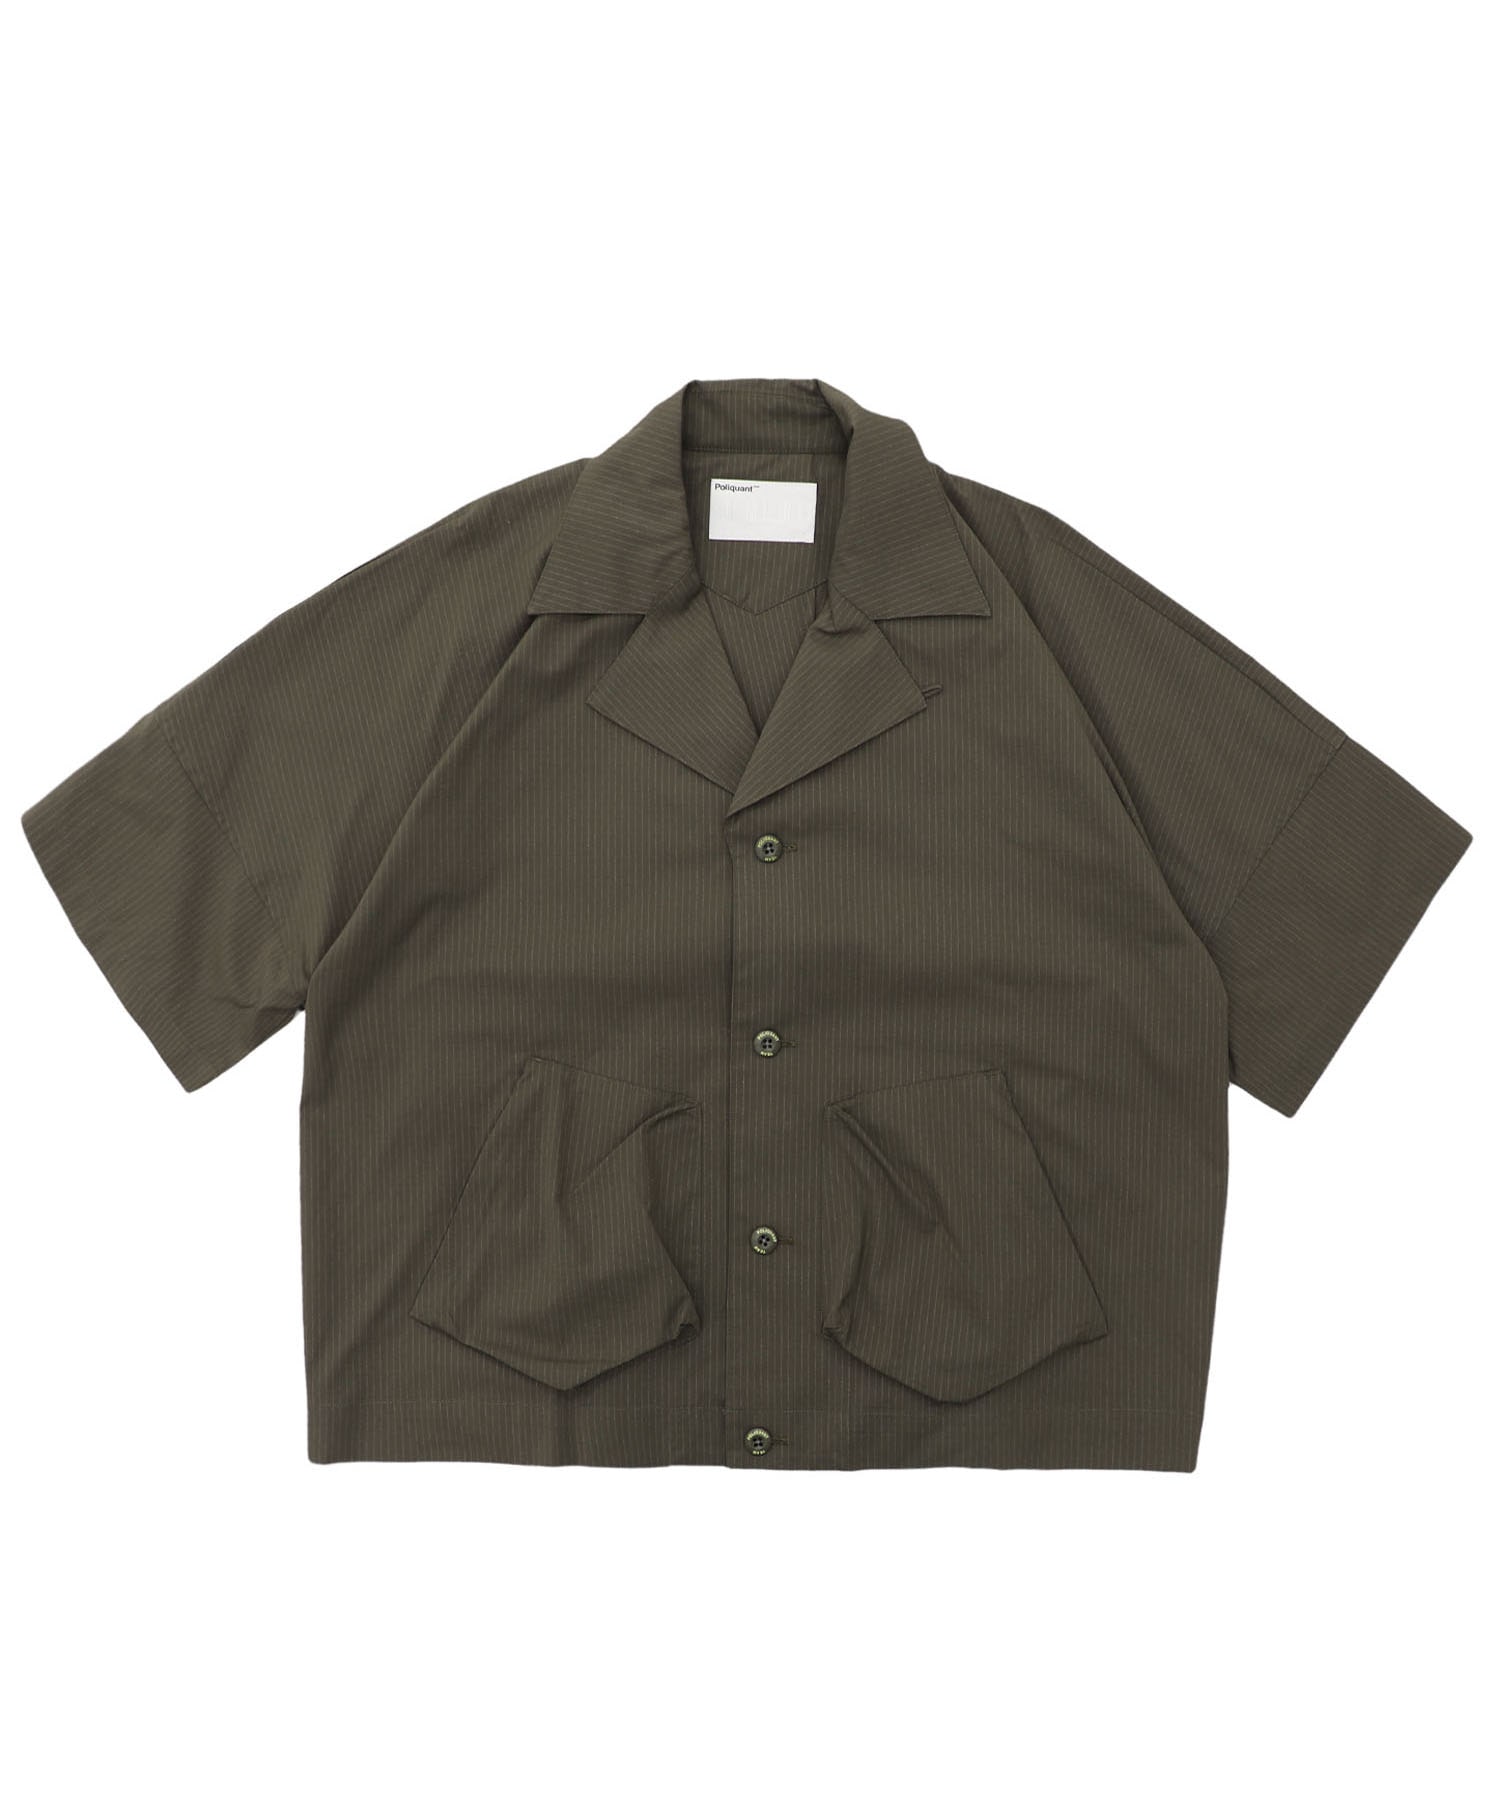 THE STRETCHED RIP-STOP S/S WORK SHIRTS